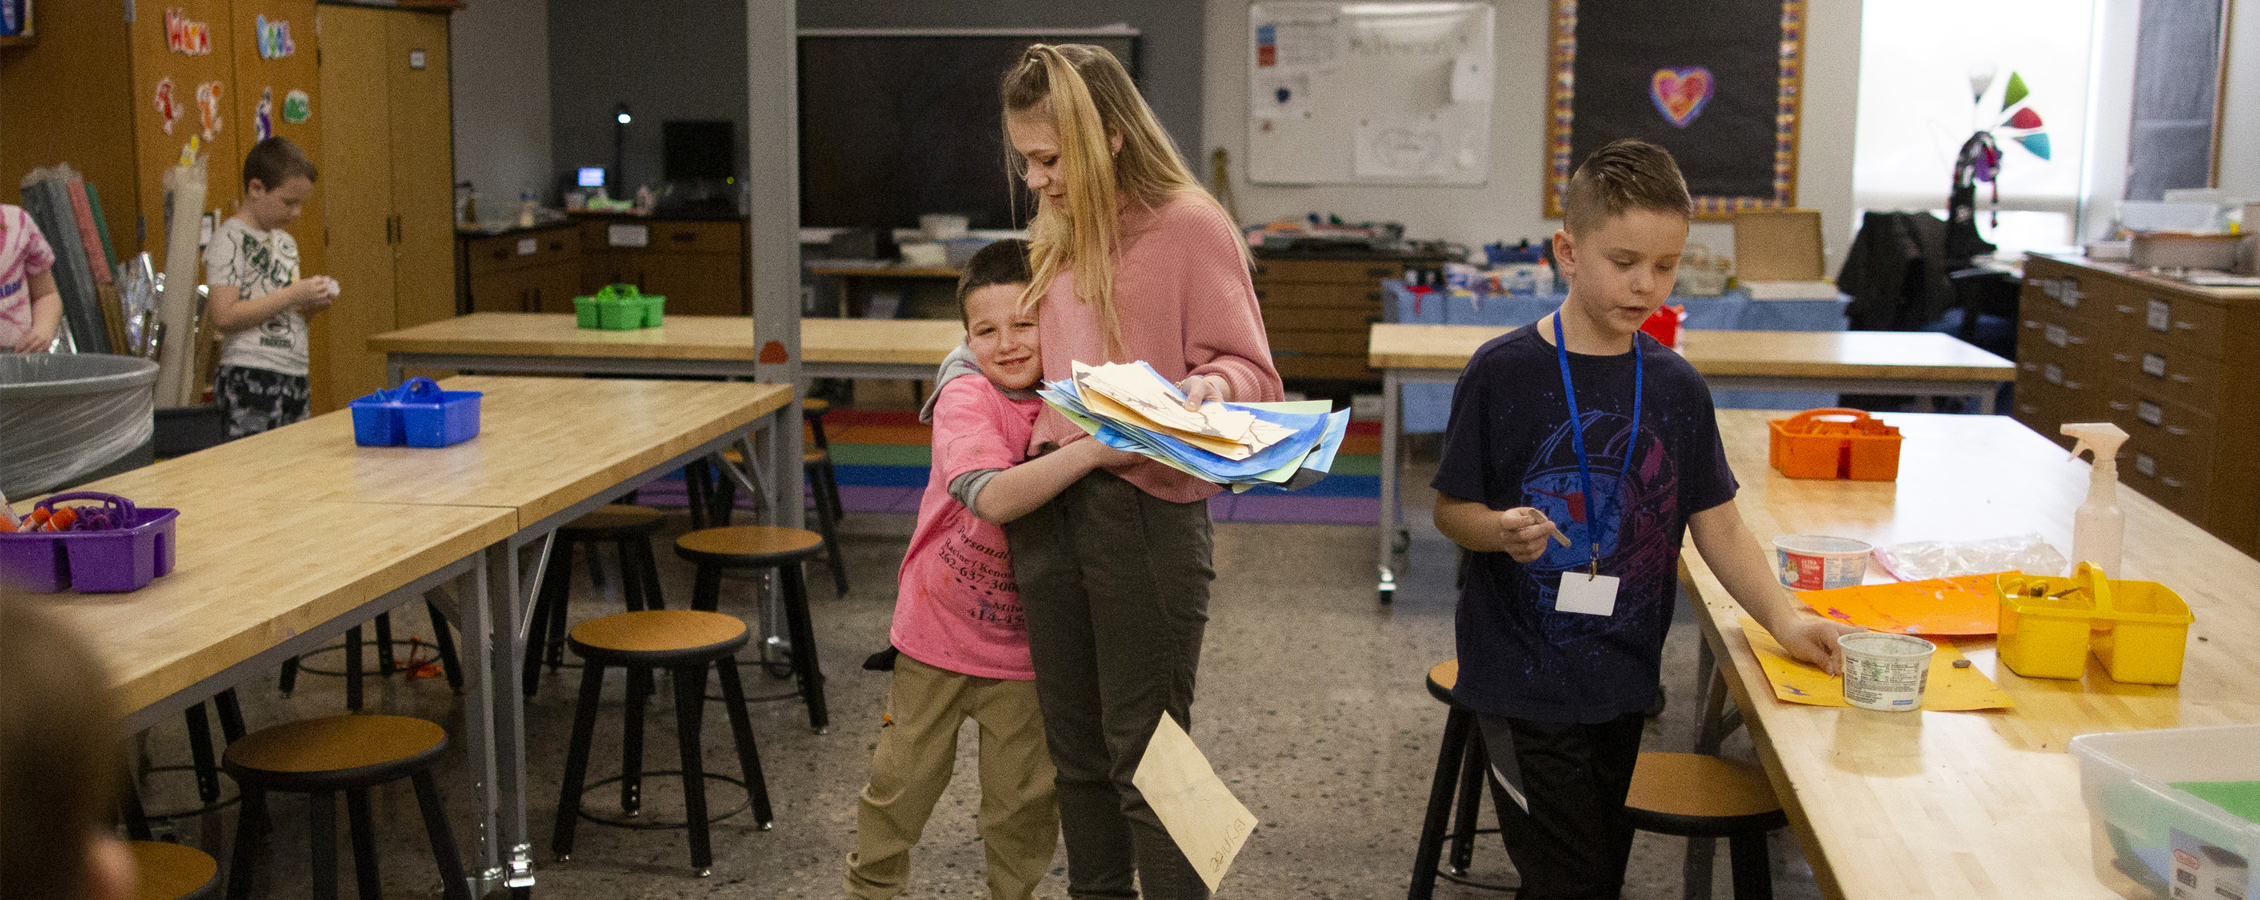 Hollyn Peterson receives a hug from a student in an art classroom.